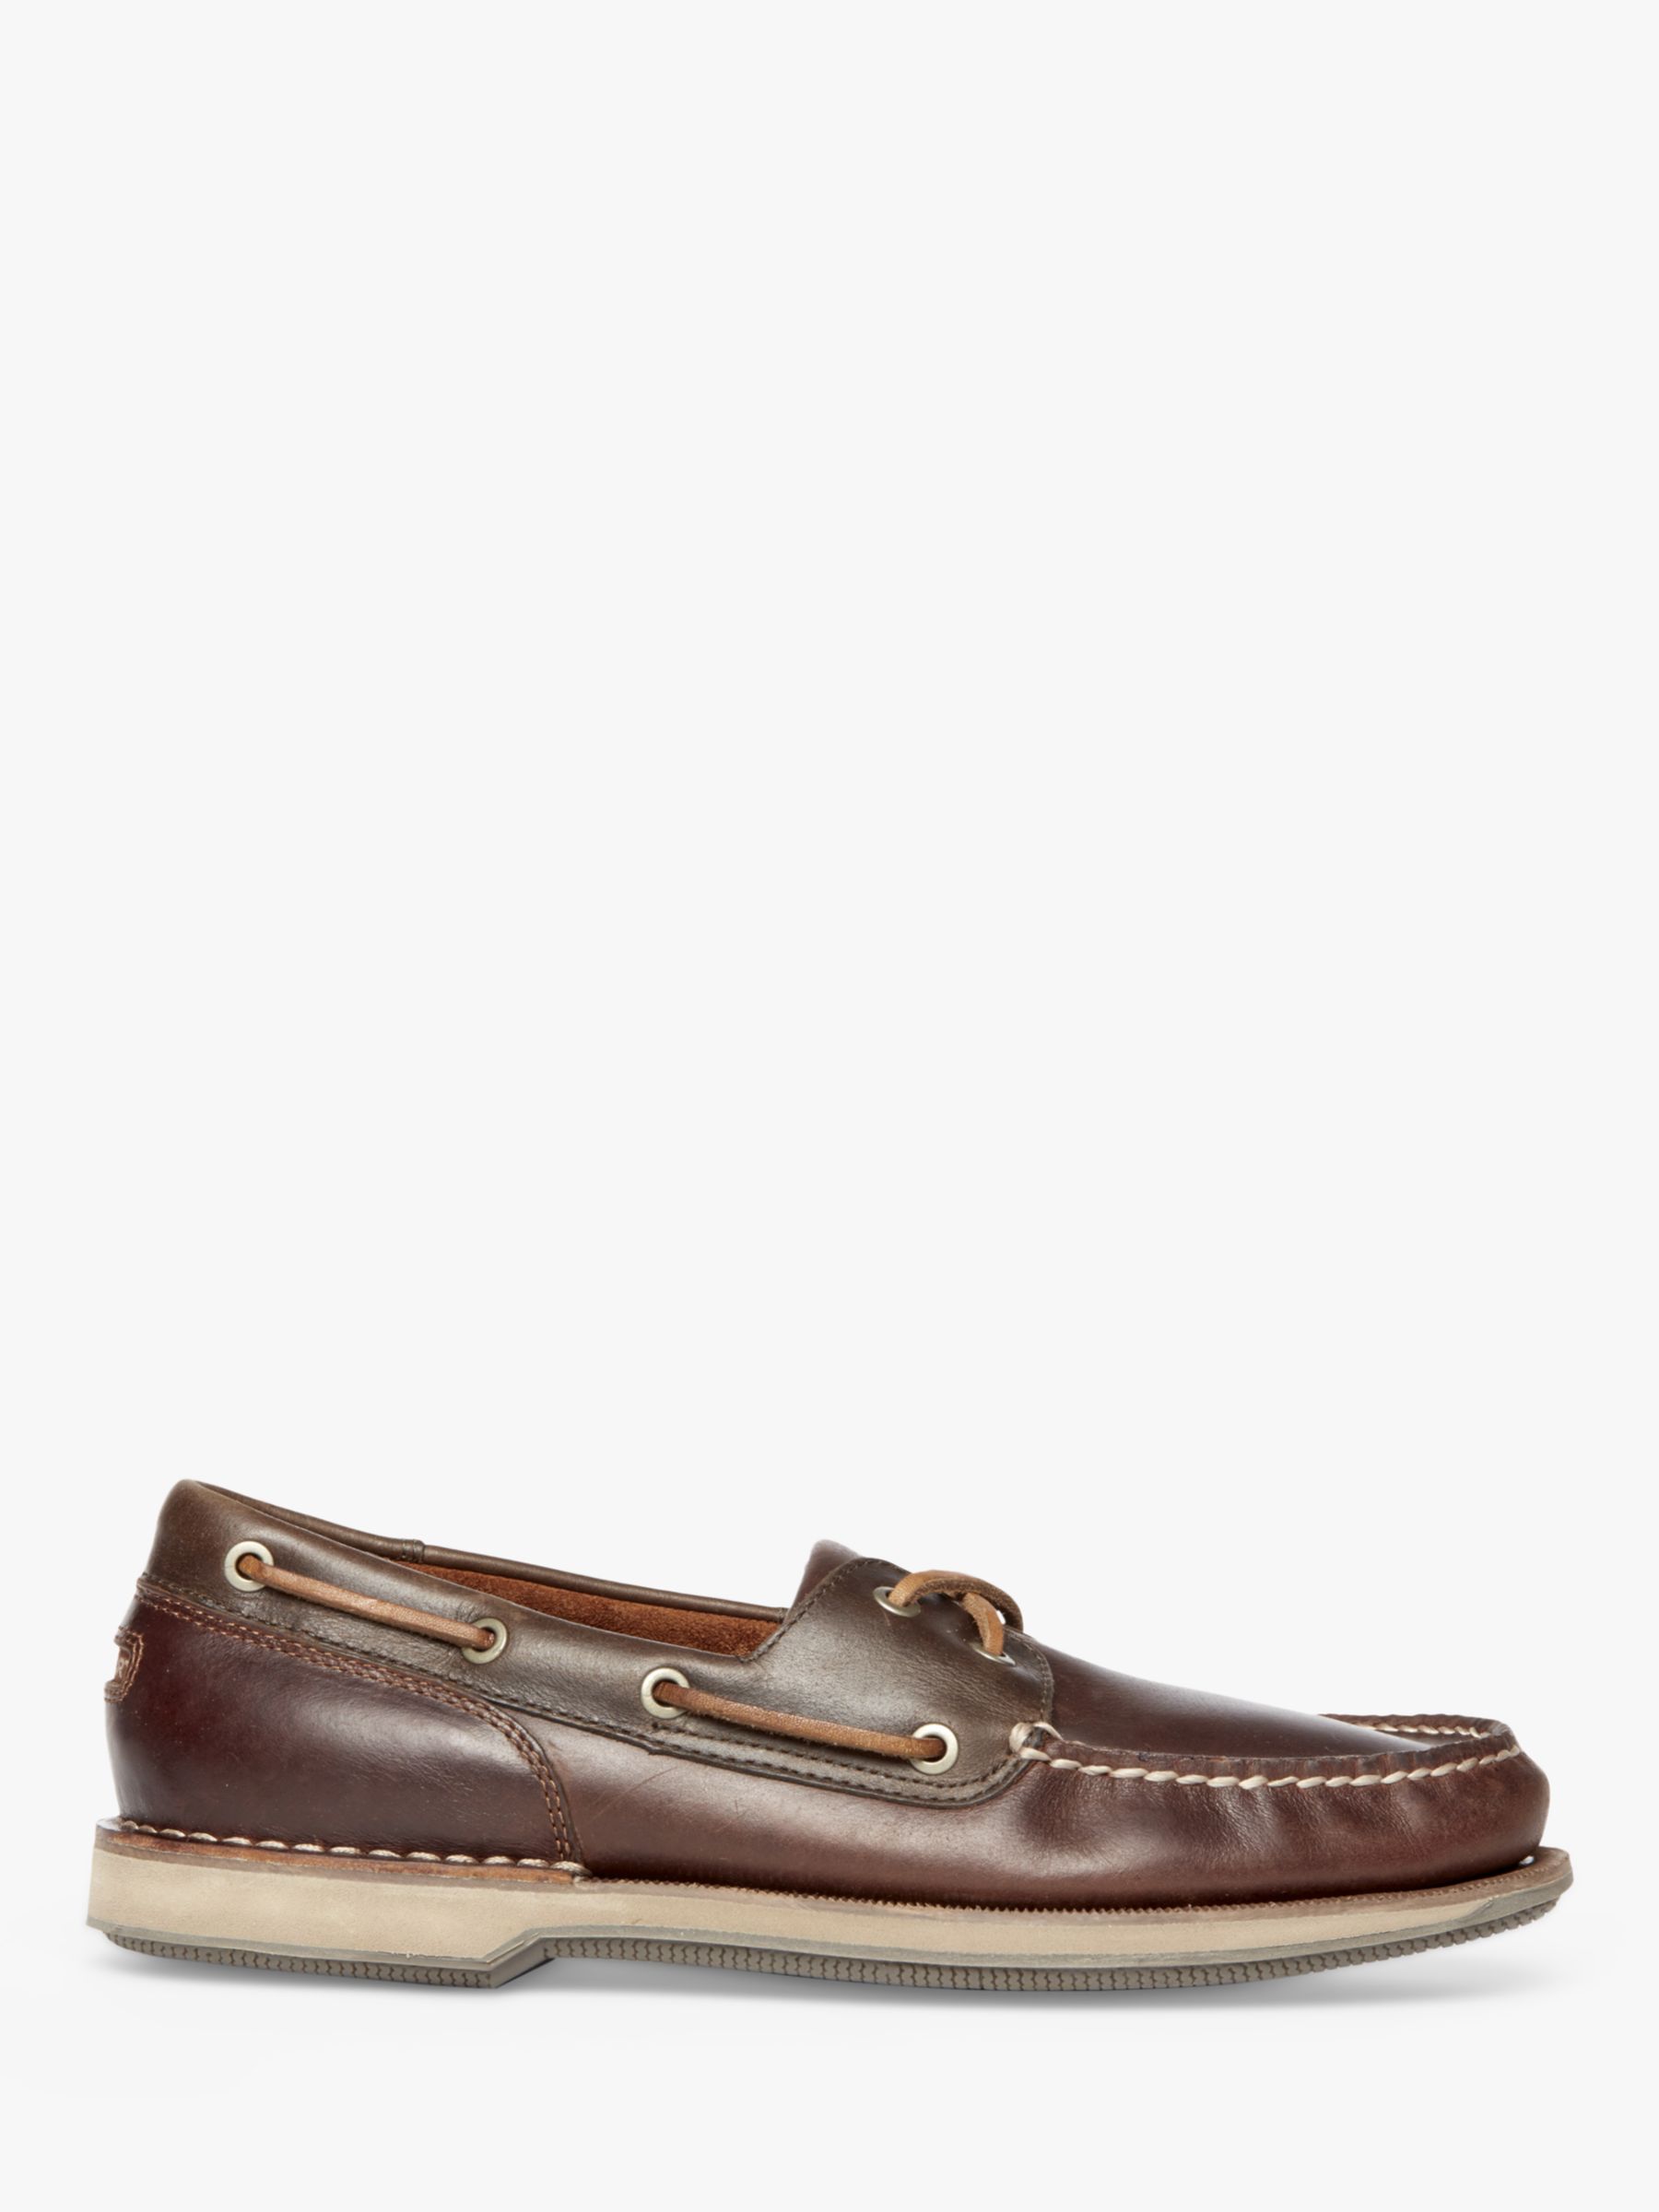 rockport perth mens boat shoes